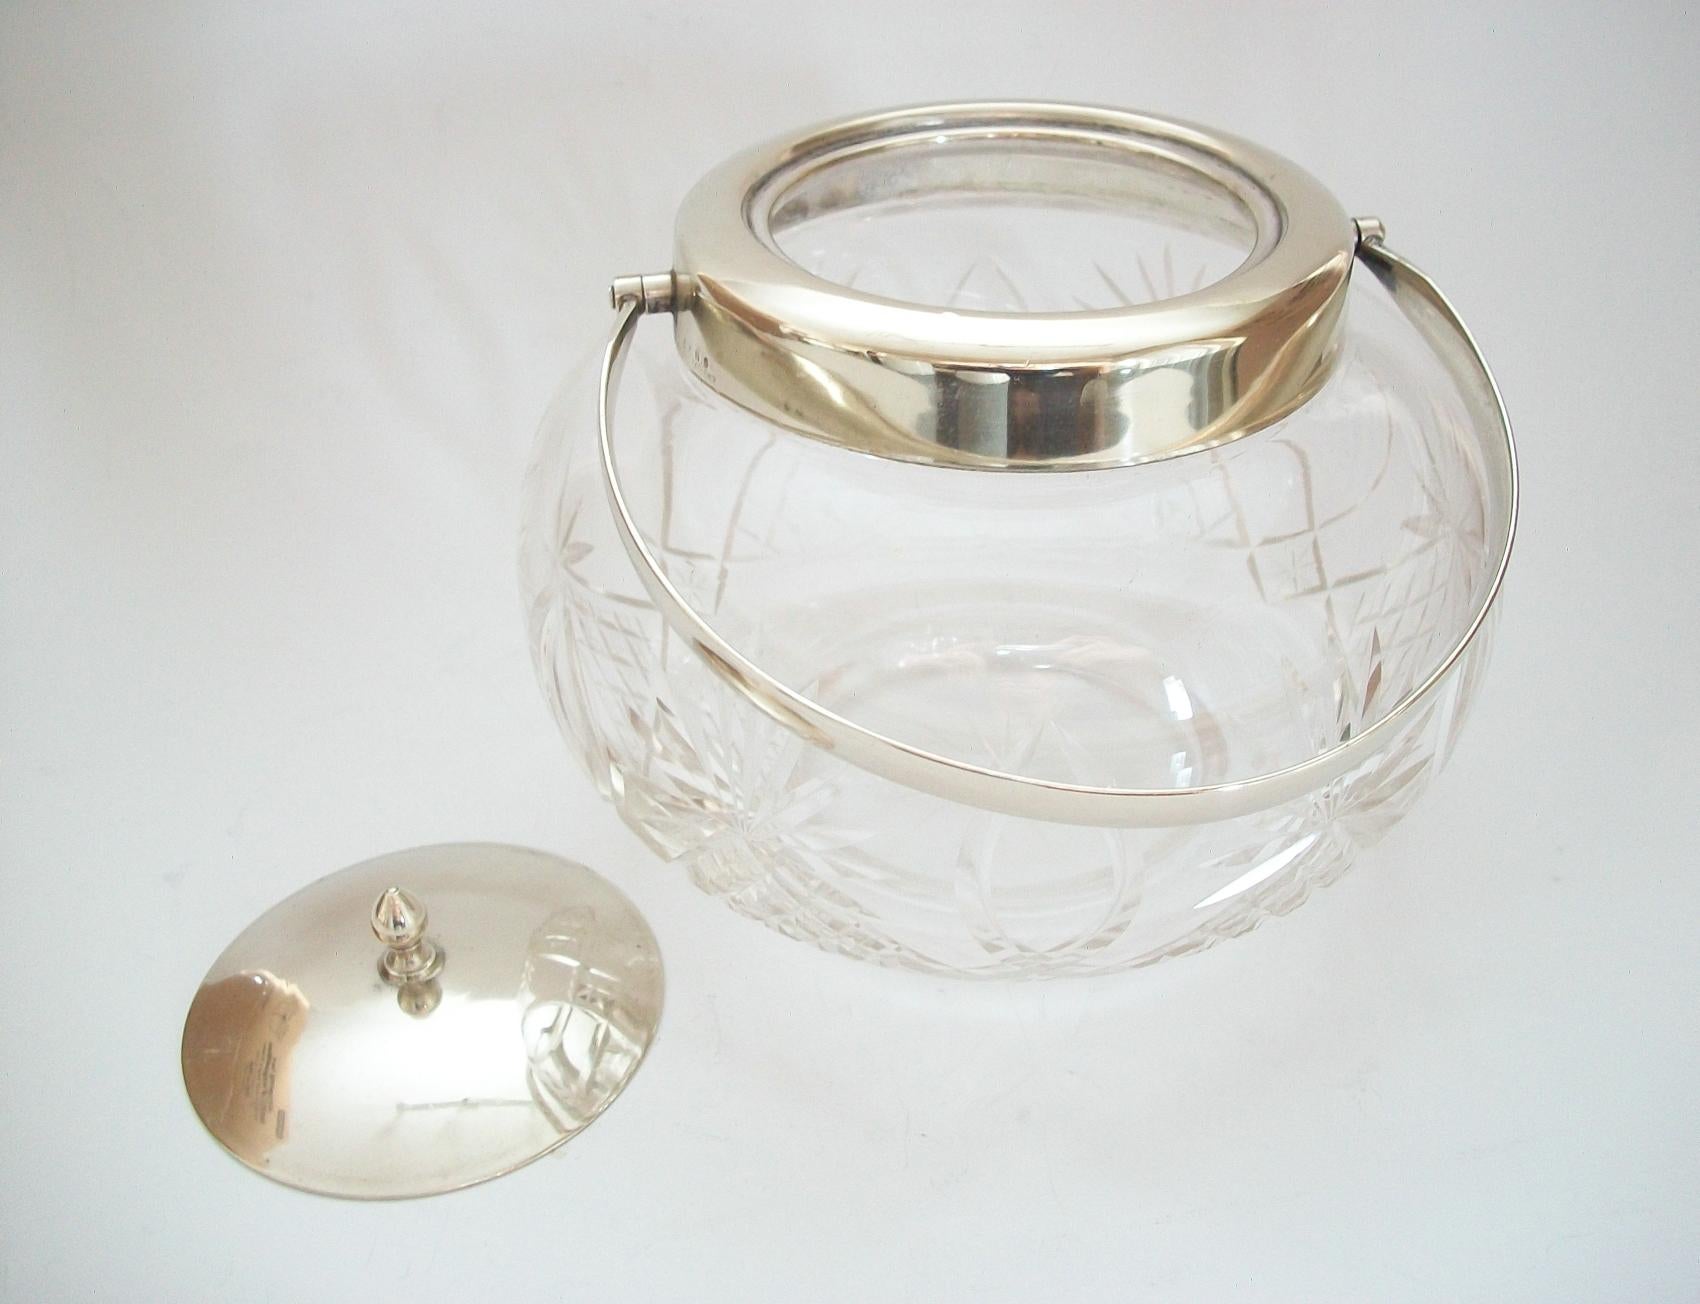 Cut Crystal & Silverplate Biscuit Barrel - United Kingdom - Early 20th Century For Sale 2